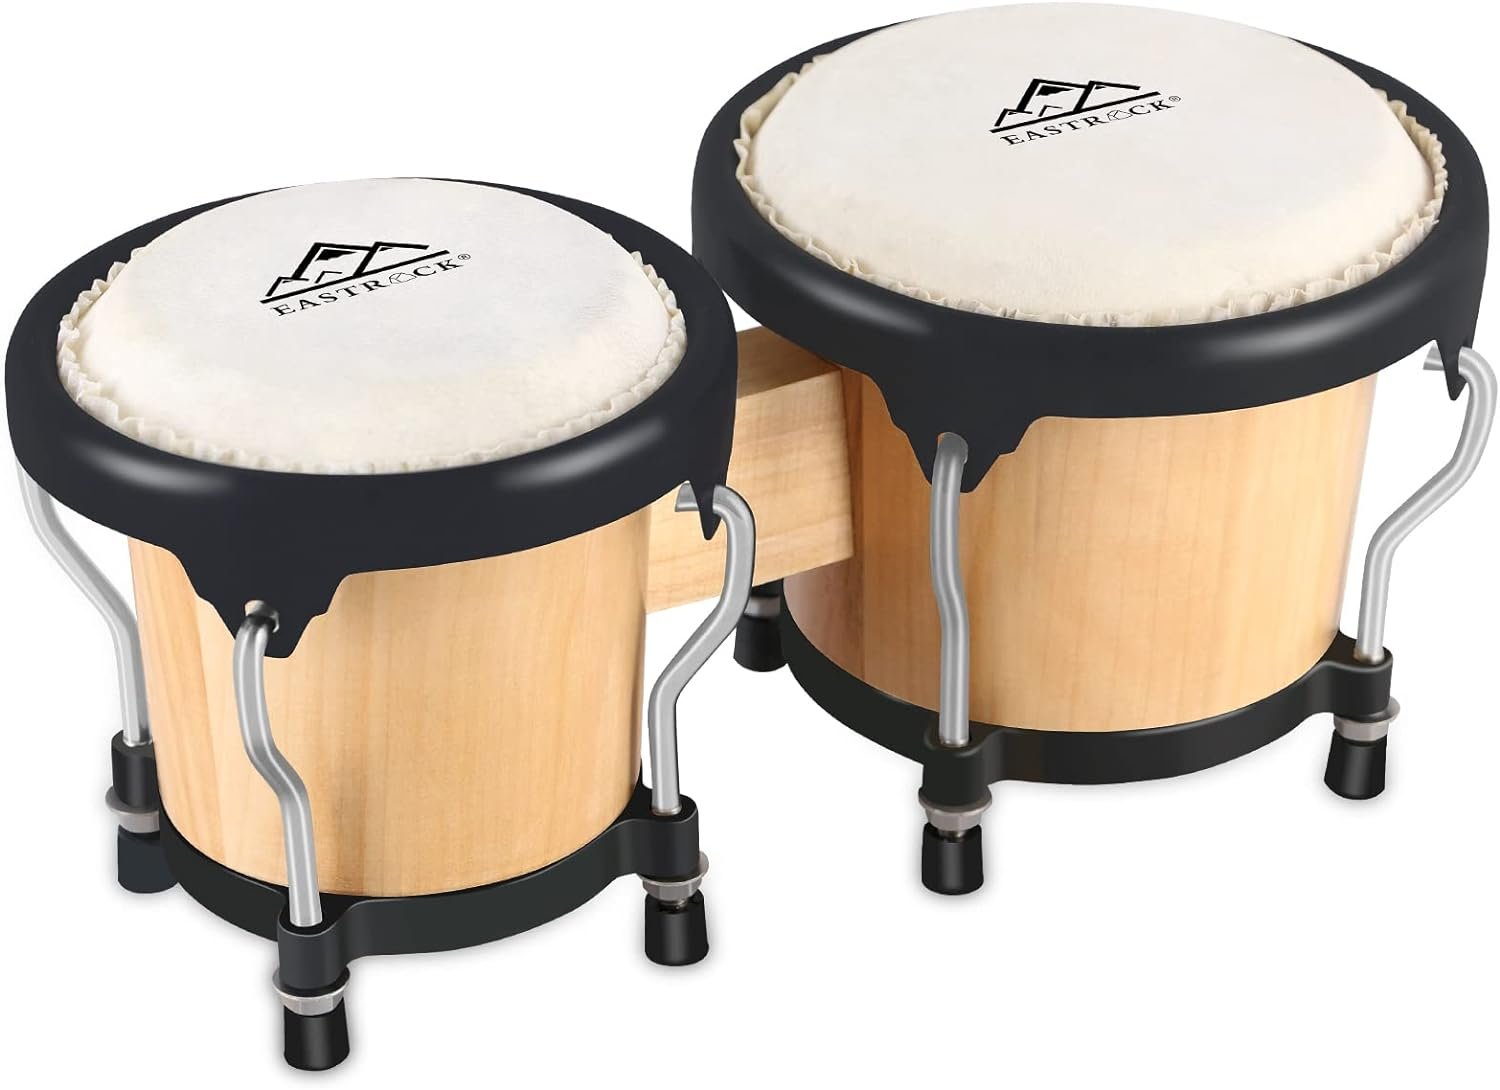 EastRock Bongo Drum 4” and 5” Set for Adults Kids Beginners Professionals Tunable Wood and Metal Drum Percussion Instruments With Tuning Wrench